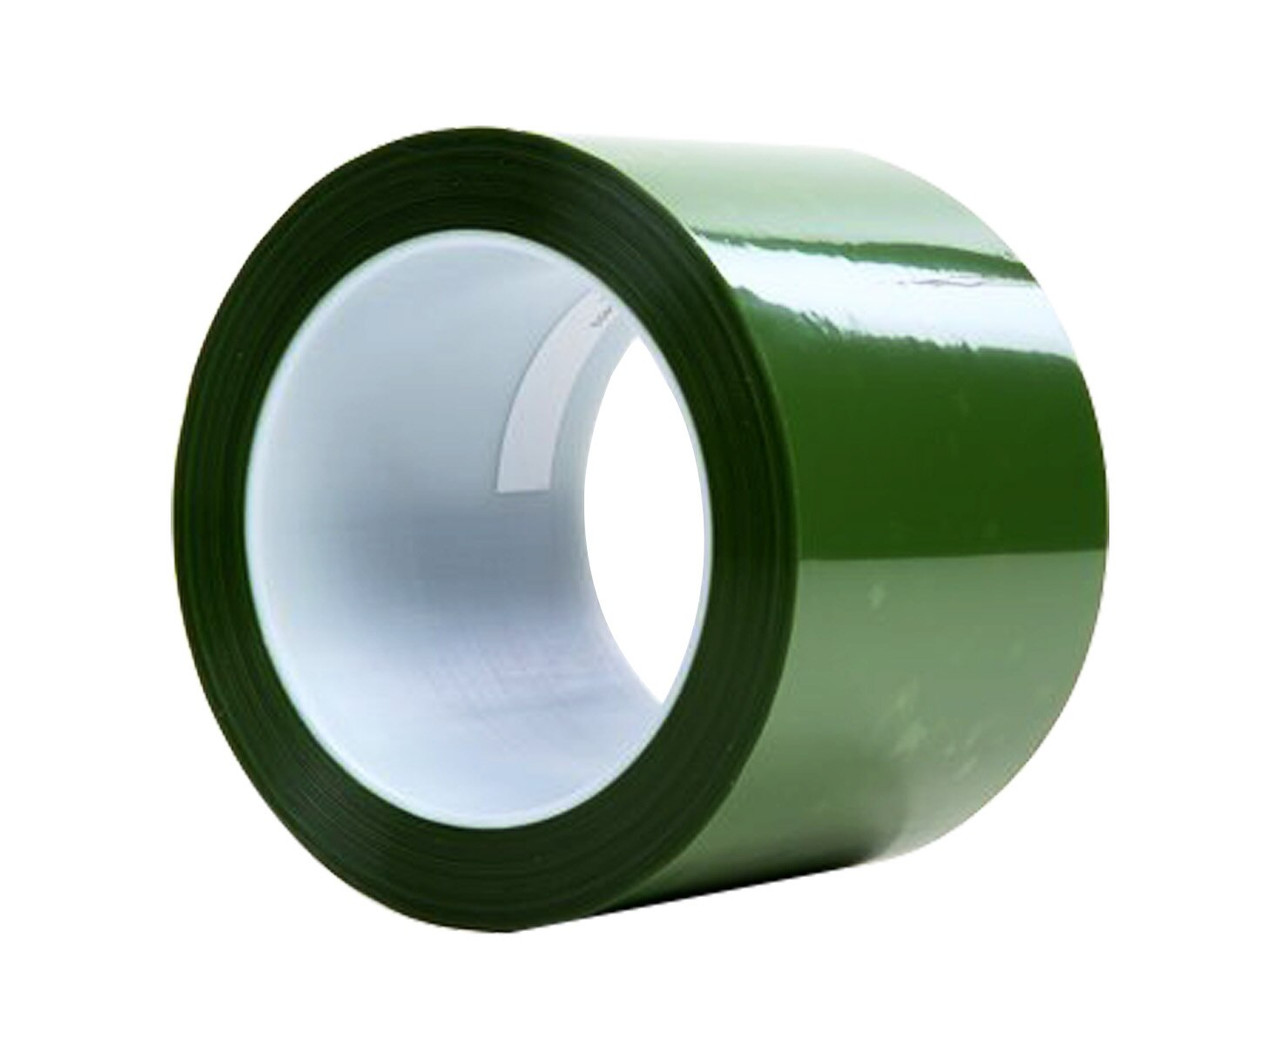 3M 021200-61461 Green 8403 Polyester Tape - 3